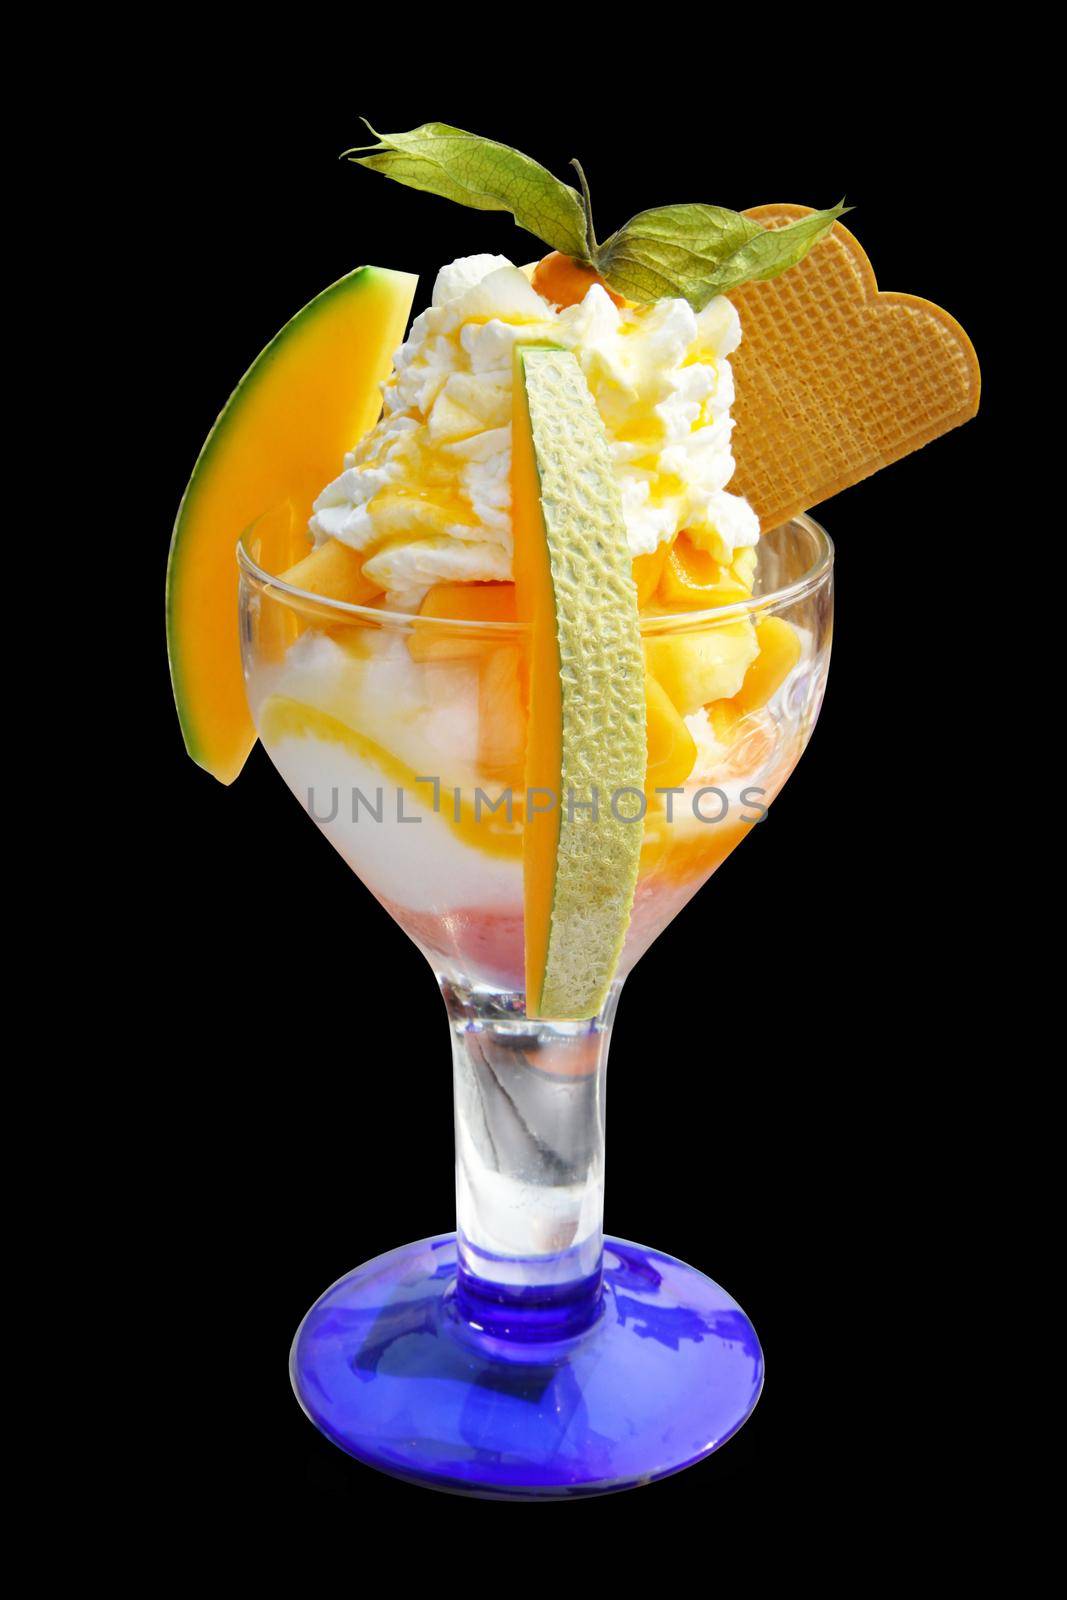 Delicious ice cream with melon and papaya. Healthy summer food concept. by Taut